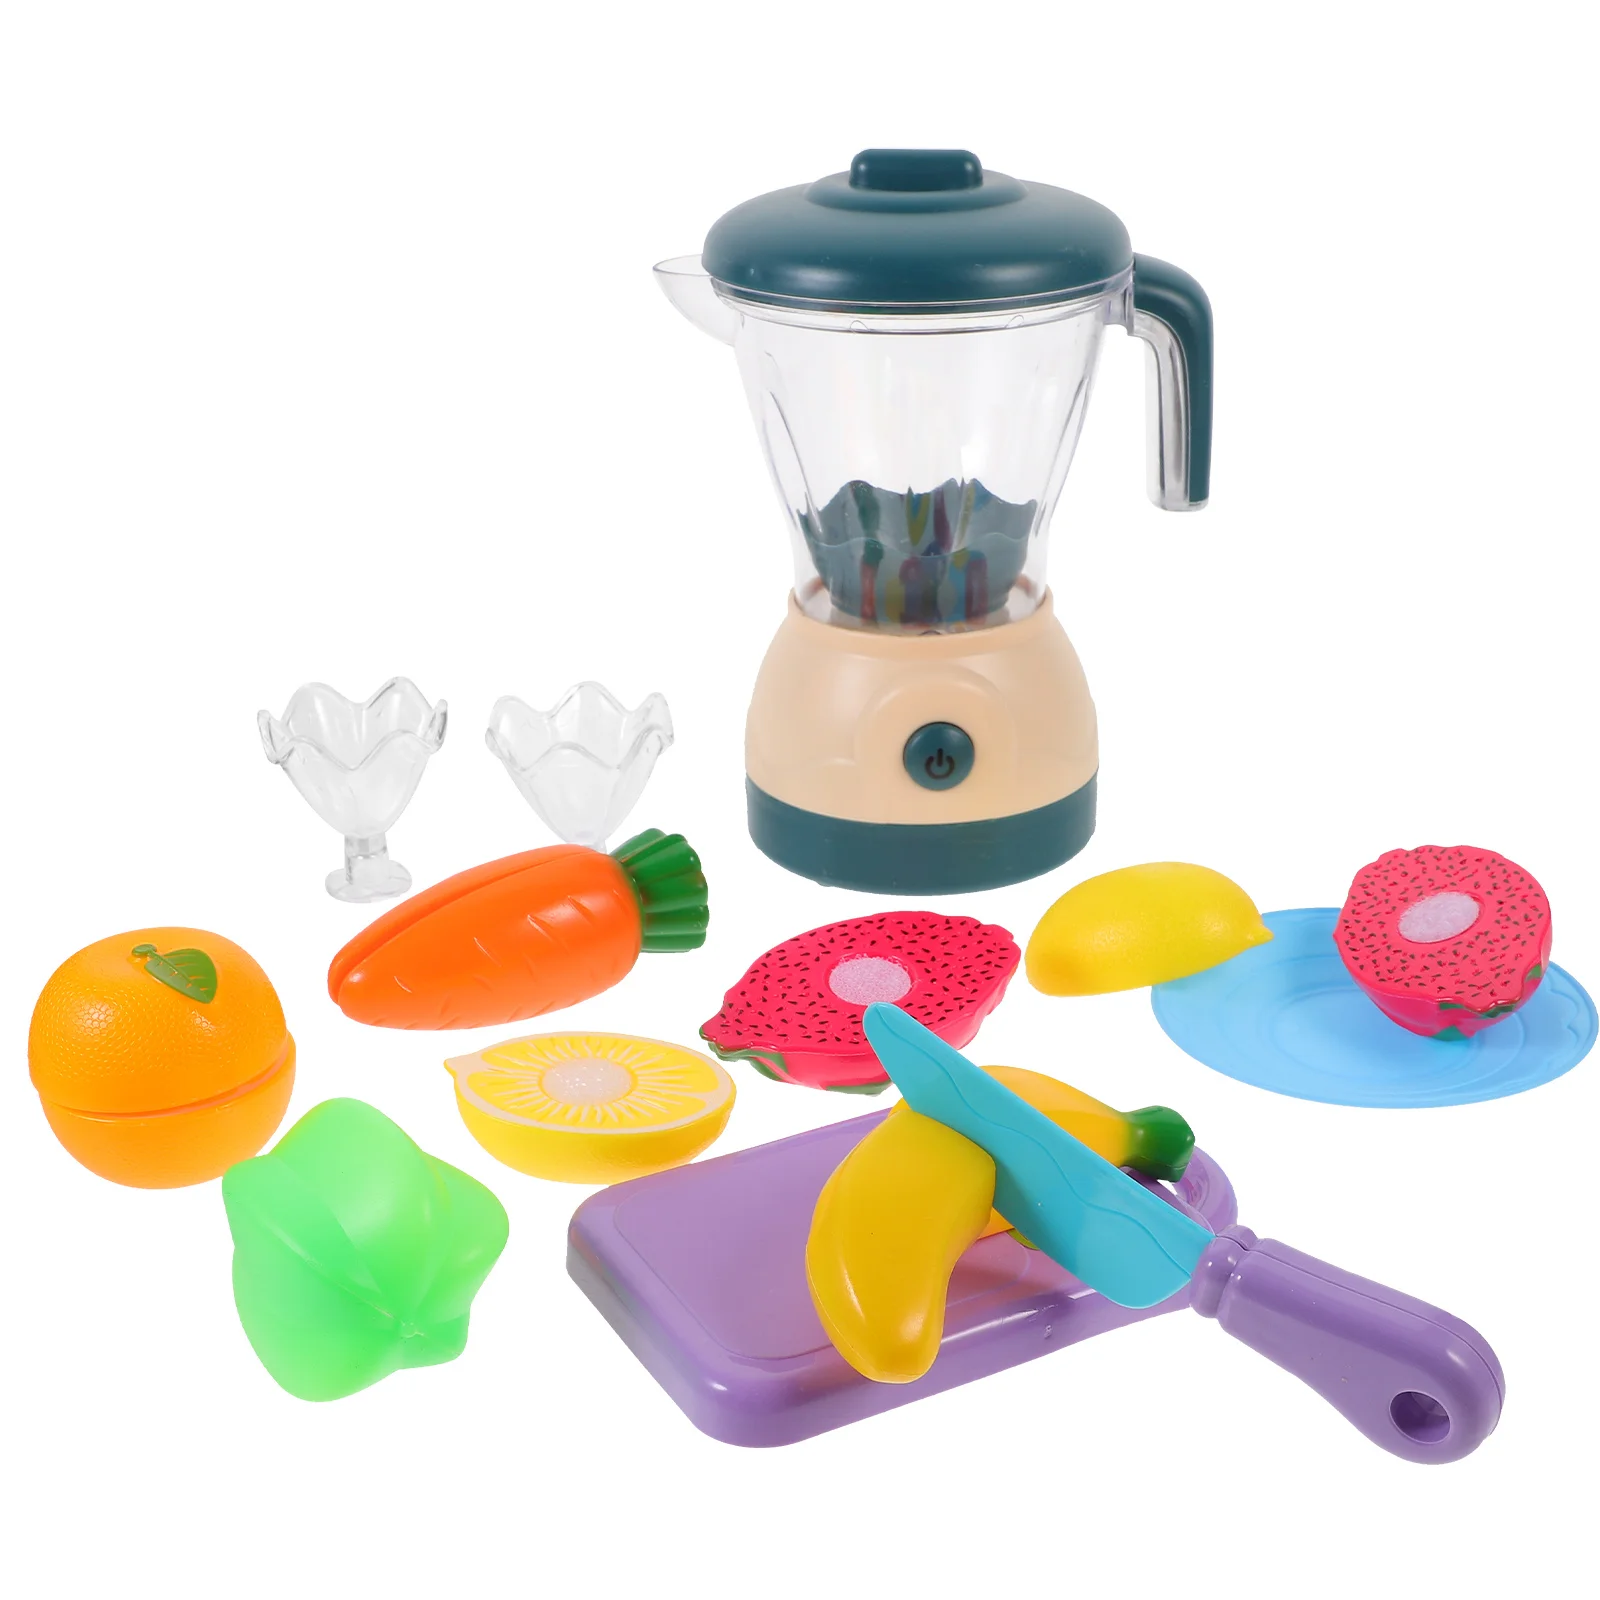 

1 Set of Simulated Juicers Toys Interesting Kids Education Playthings Children Gifts